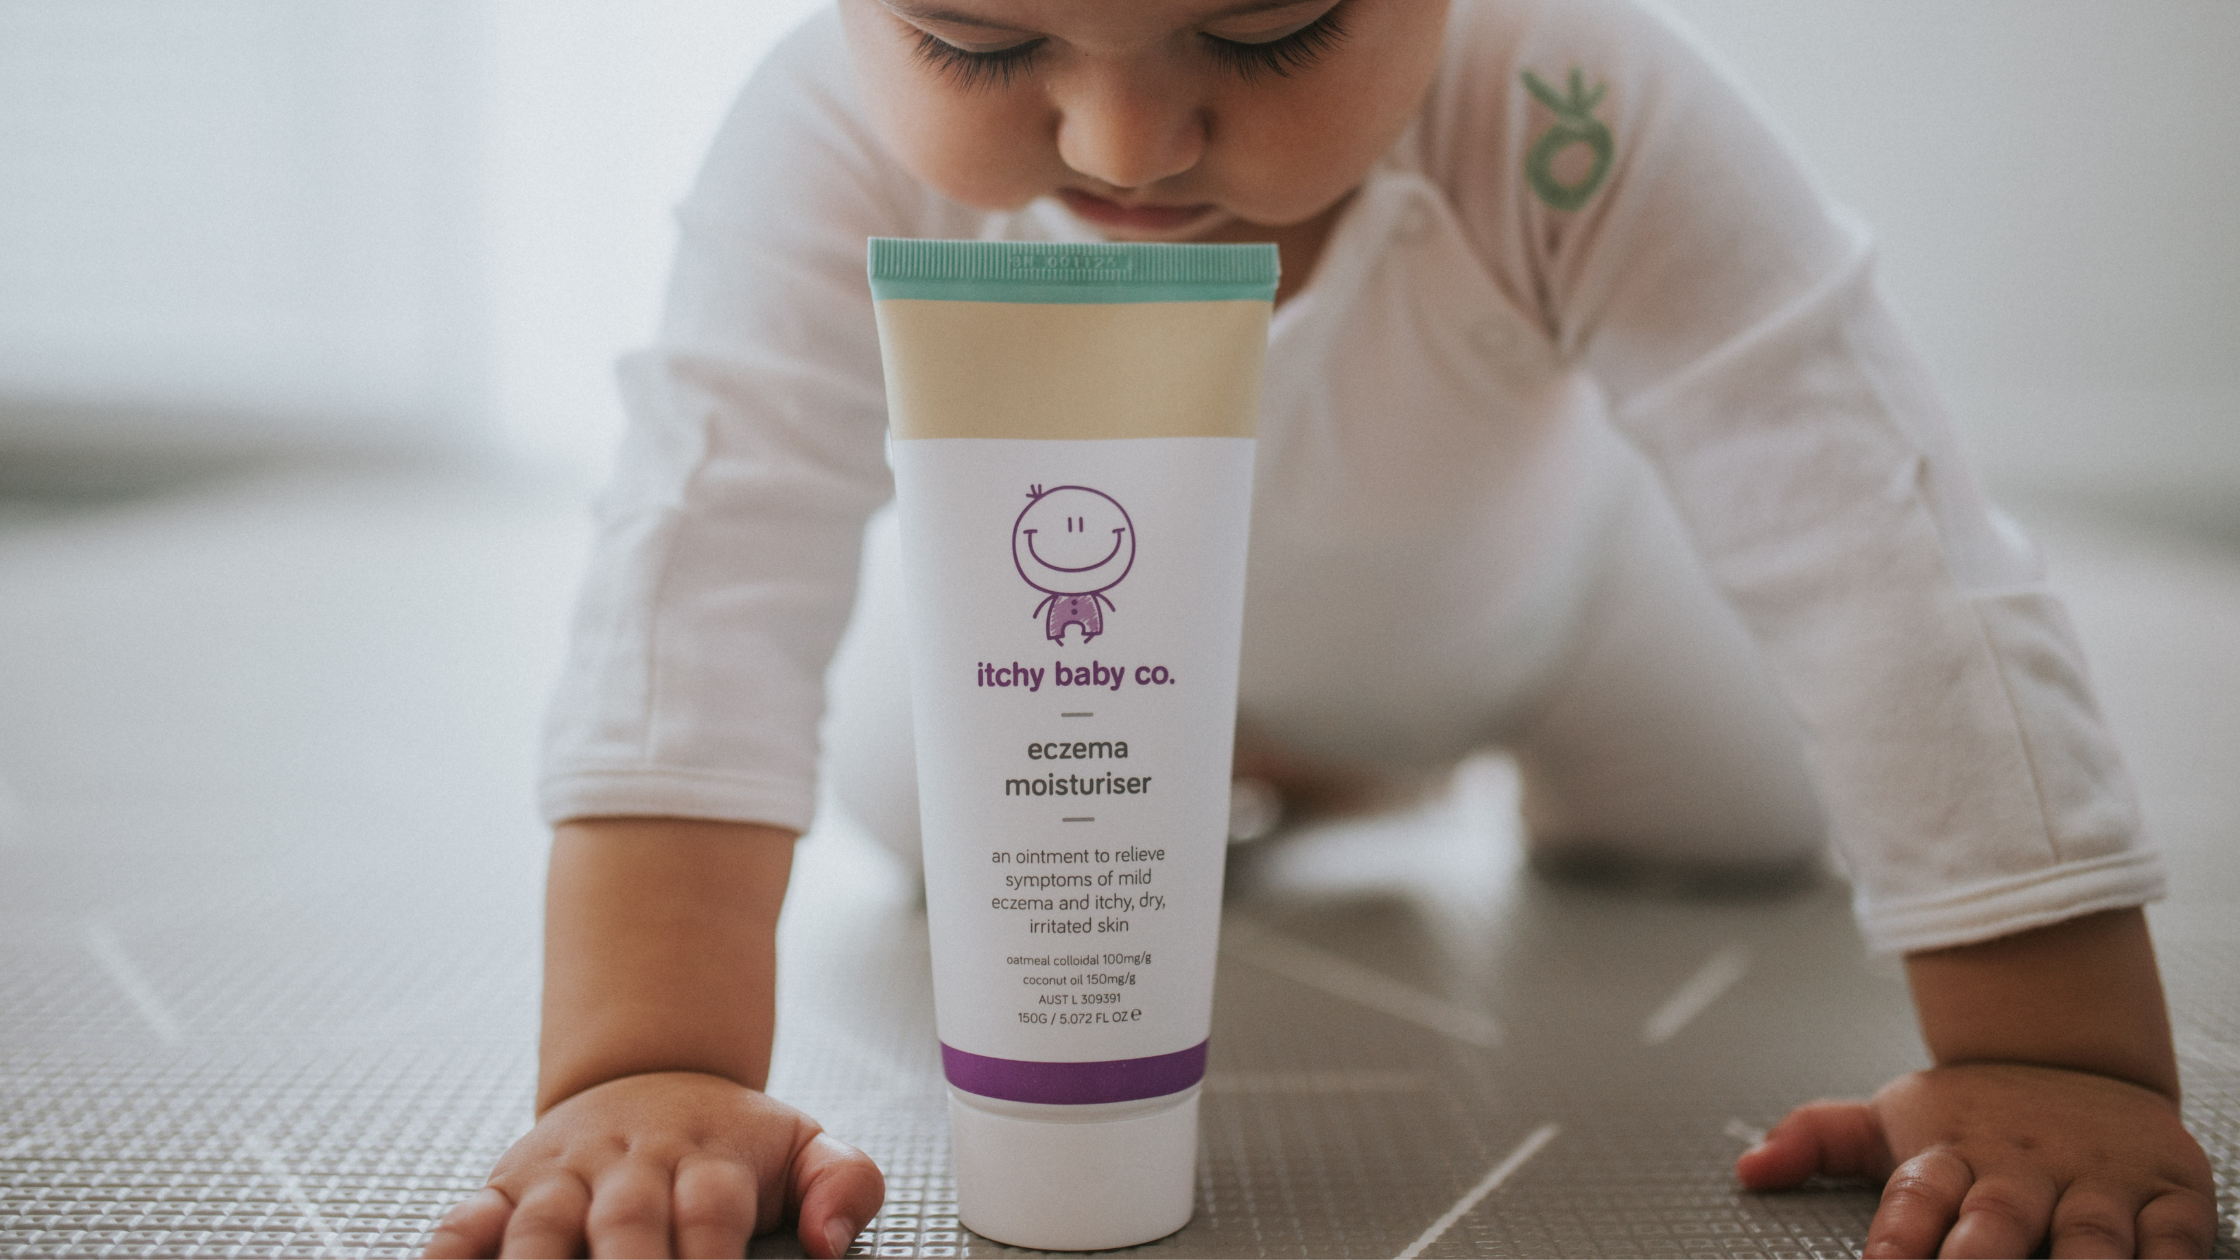 What Makes Itchy Baby Co.'s Eczema Moisturiser Different?